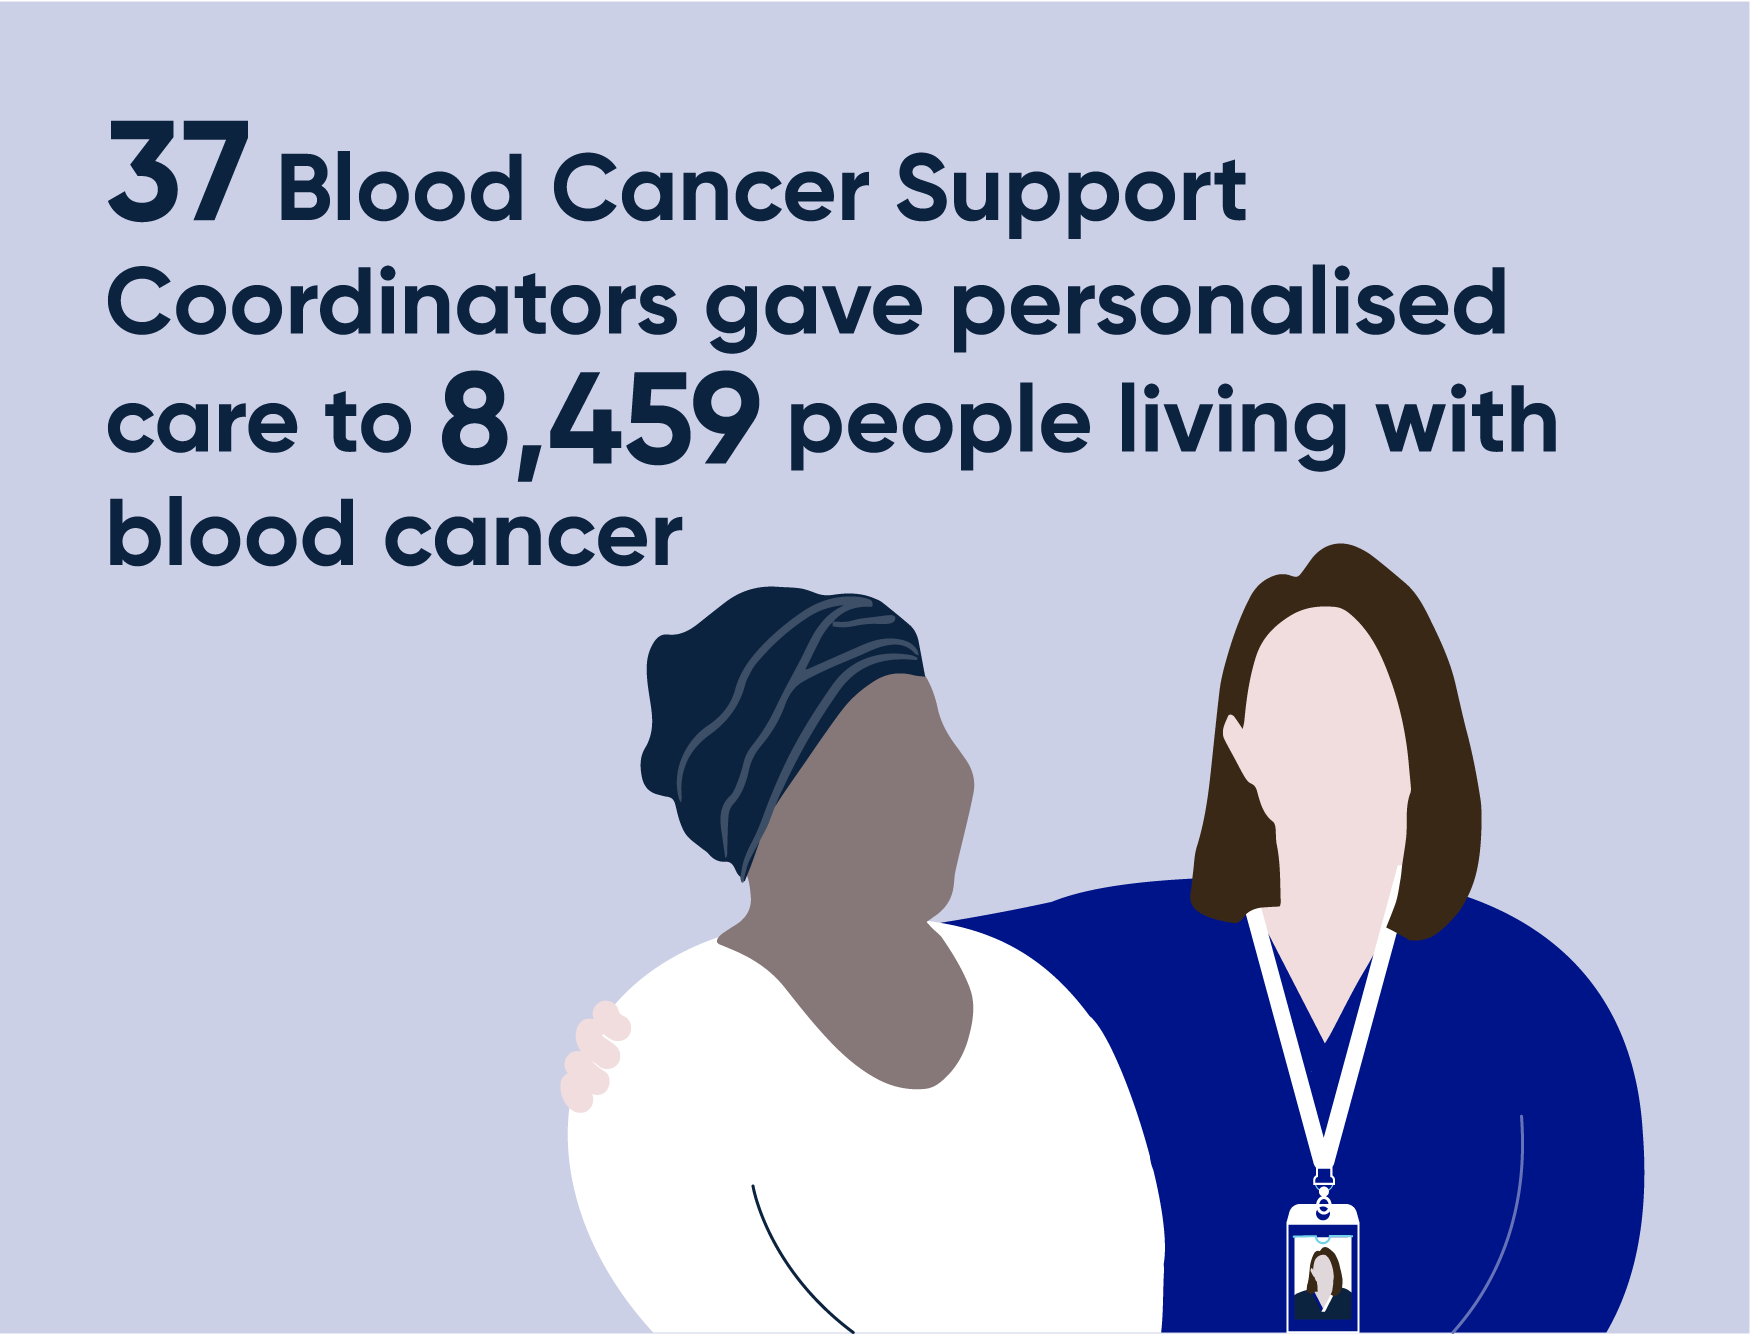 37 Leukaemia Foundation blood cancer support coordinators gave care to 8,459 people living with blood cance